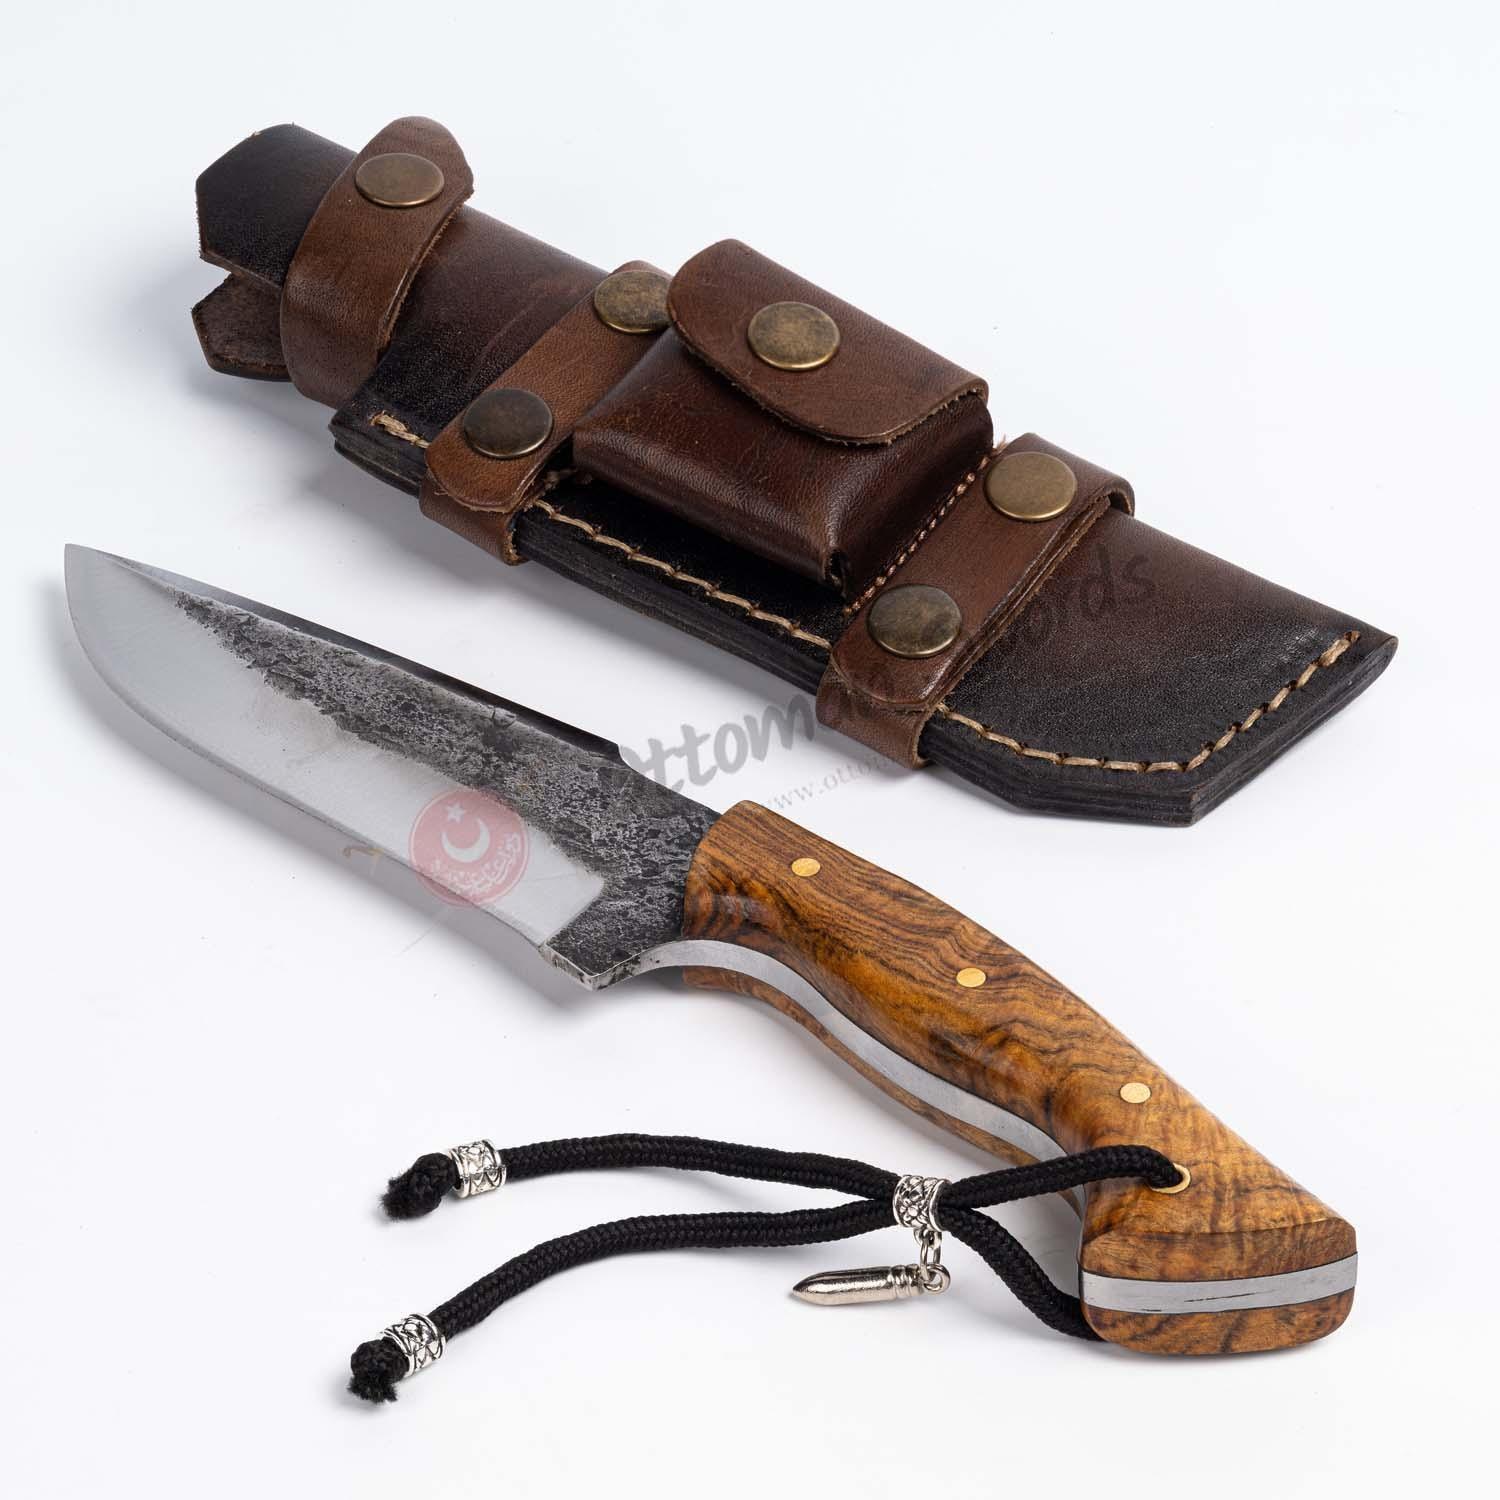 Hand Forged Survival Knife (1)